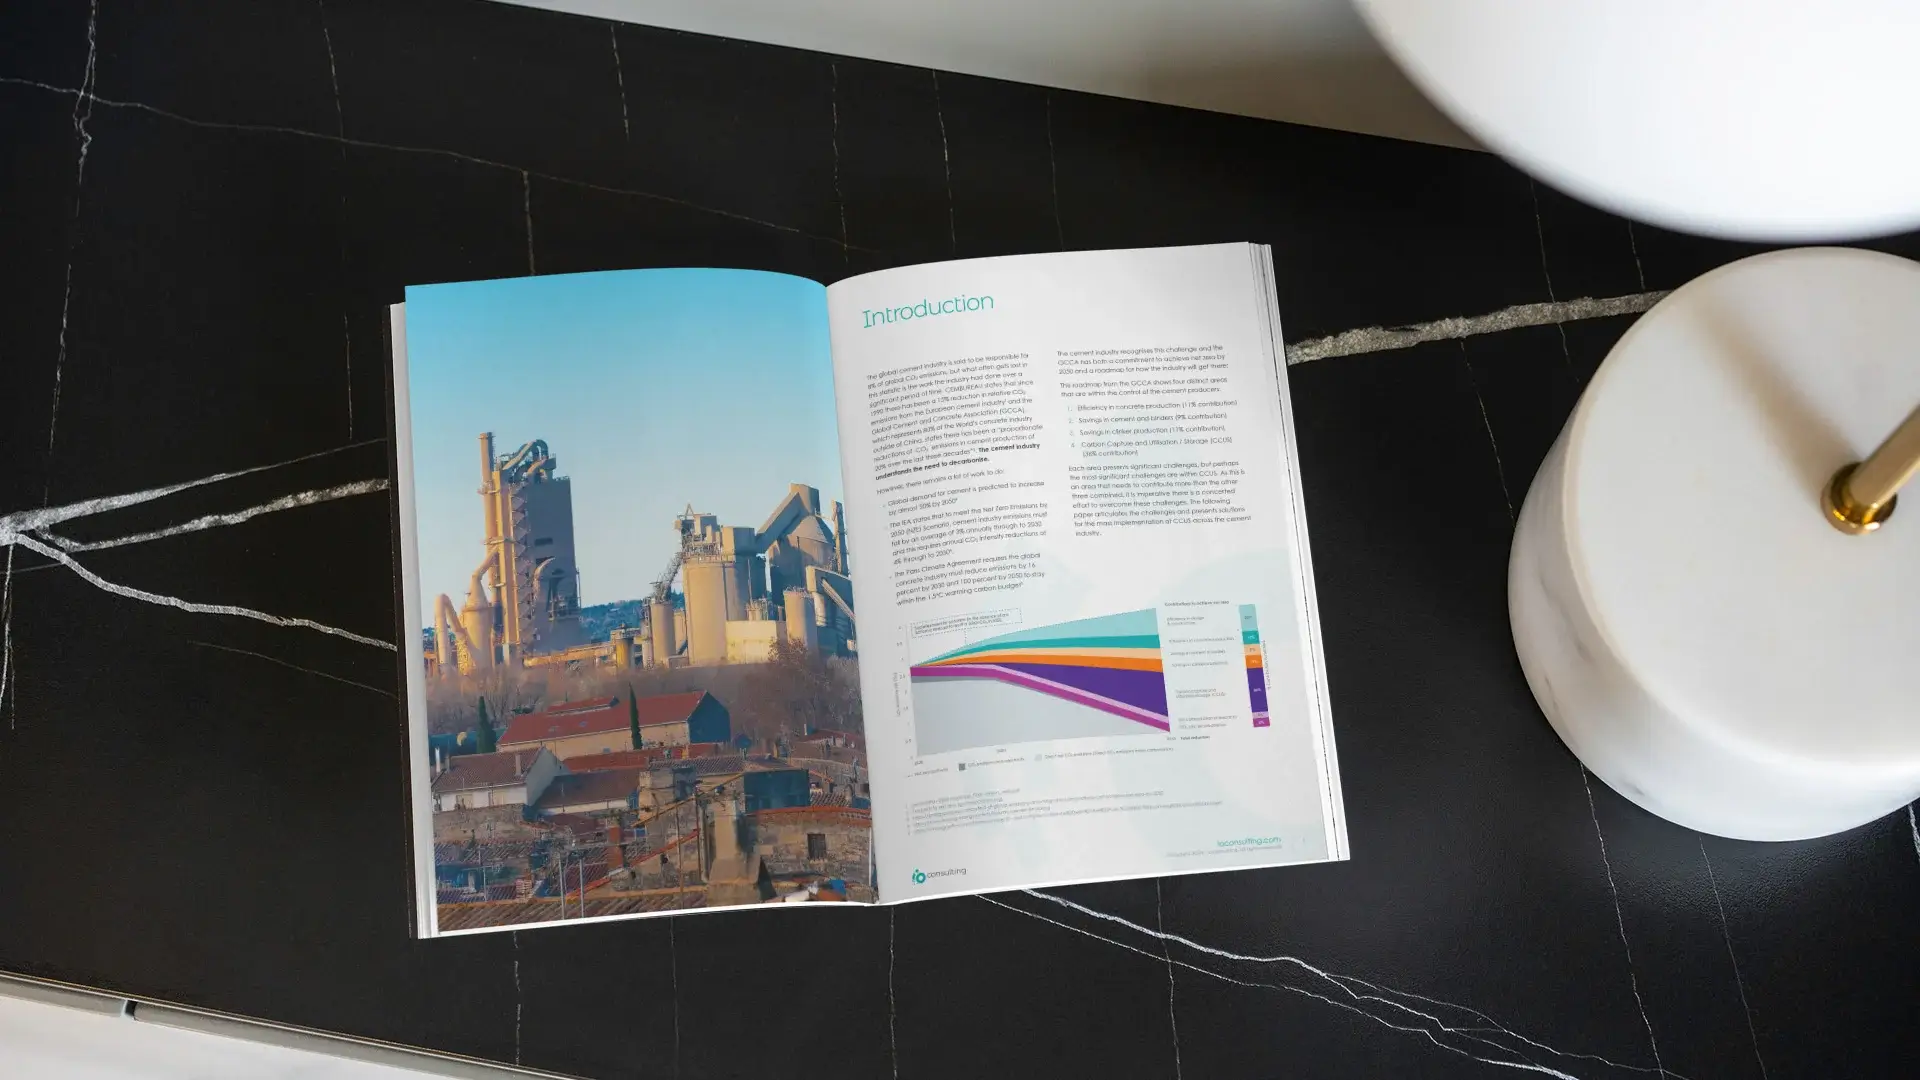 The inside spread of one of io's reports, it features a large image of an energy plant on the left and on the right a page of text and a graph.